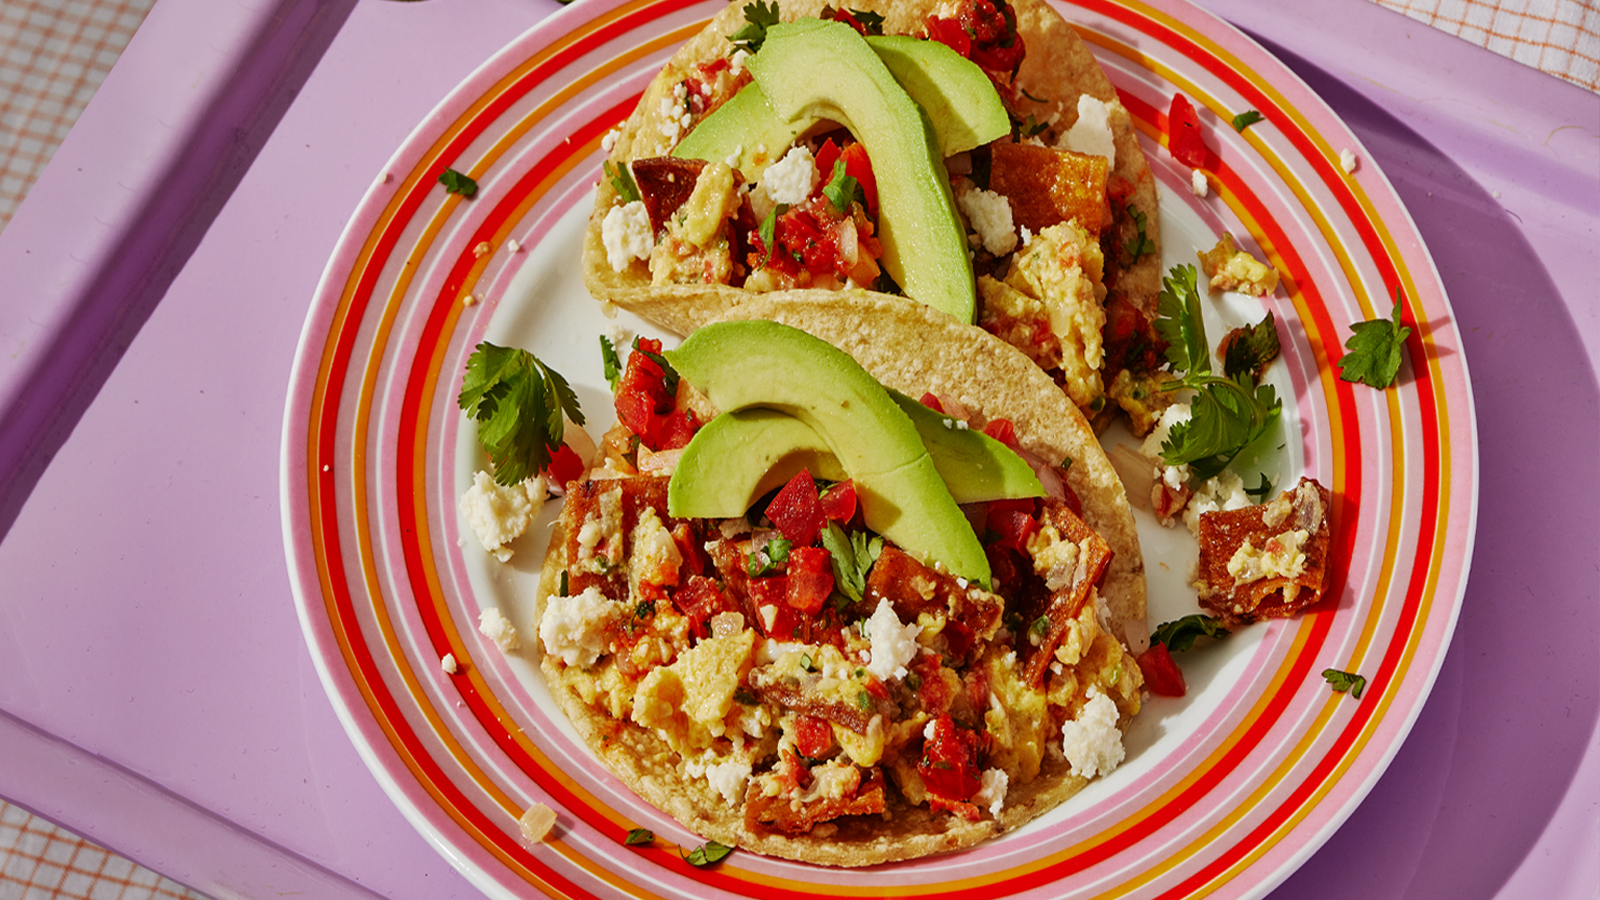 A plate with two migas tacos topped with sliced avocado.